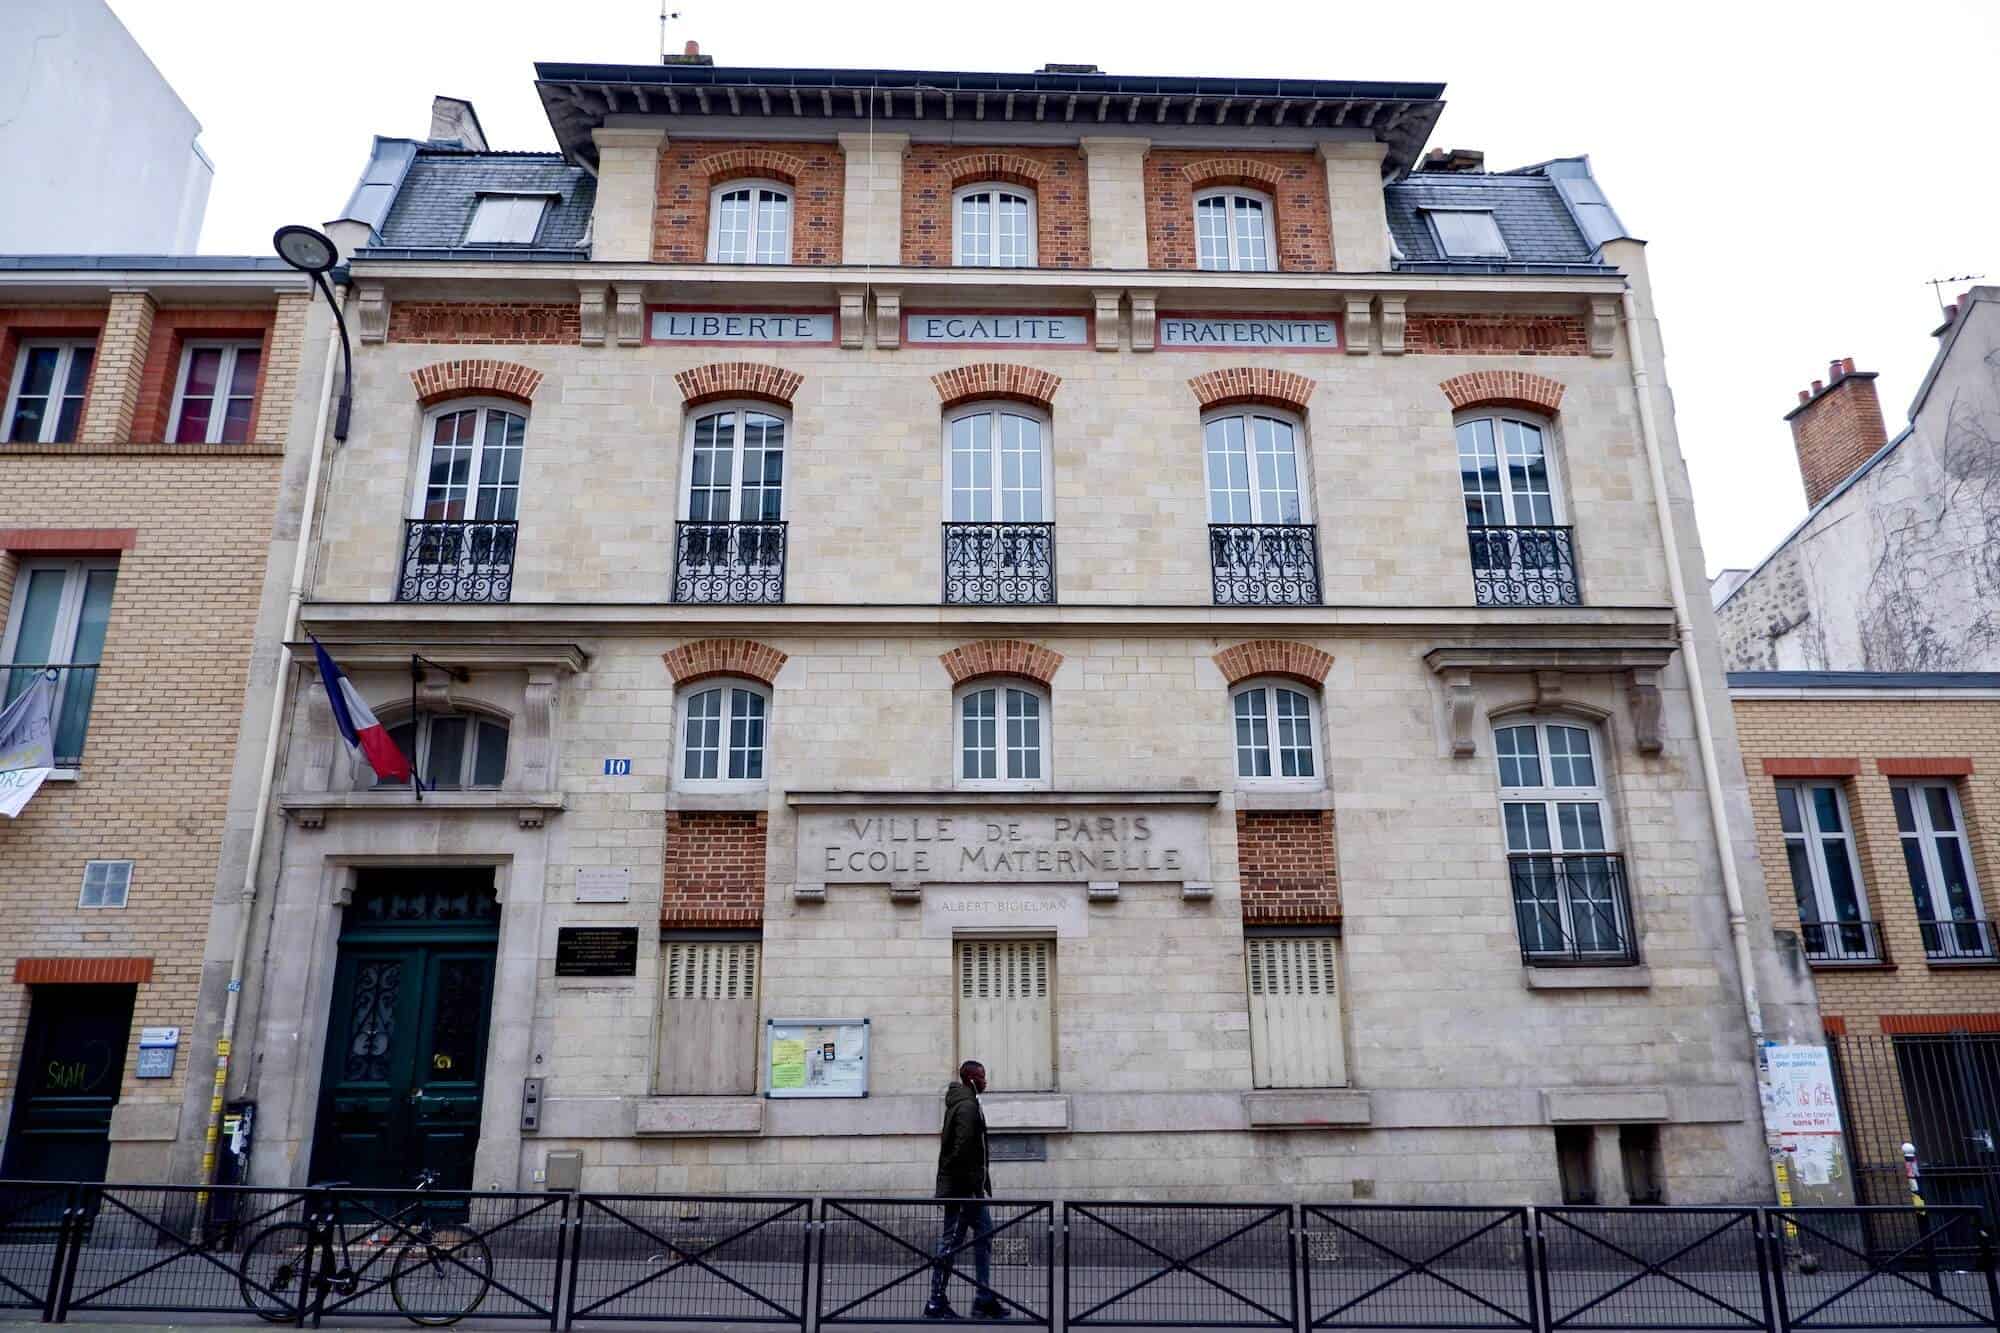 The facade of a kindergarten. The words 'Liberte, Egalite, Fraternite' are at the top of the building, lower down are the words 'Ville de Paris, Ecole Maternelle'. There is a French flag flying above the front door. There is a man walking past.